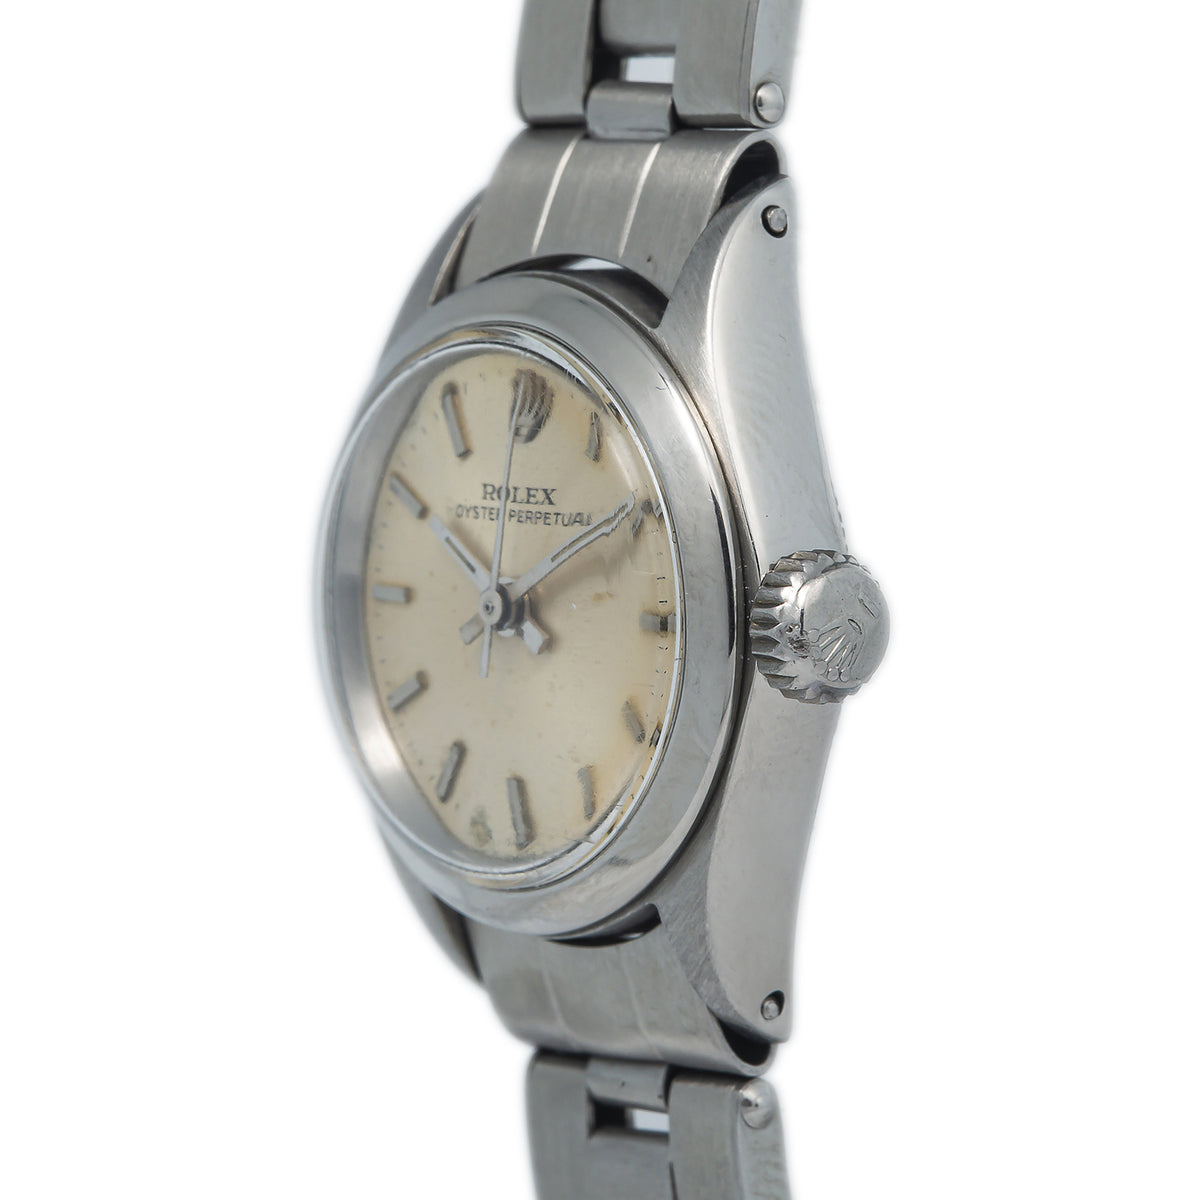 Rolex Oyster Perpetual 6618 Automatic Stainless Silver Dial Ladies Watch 24mm